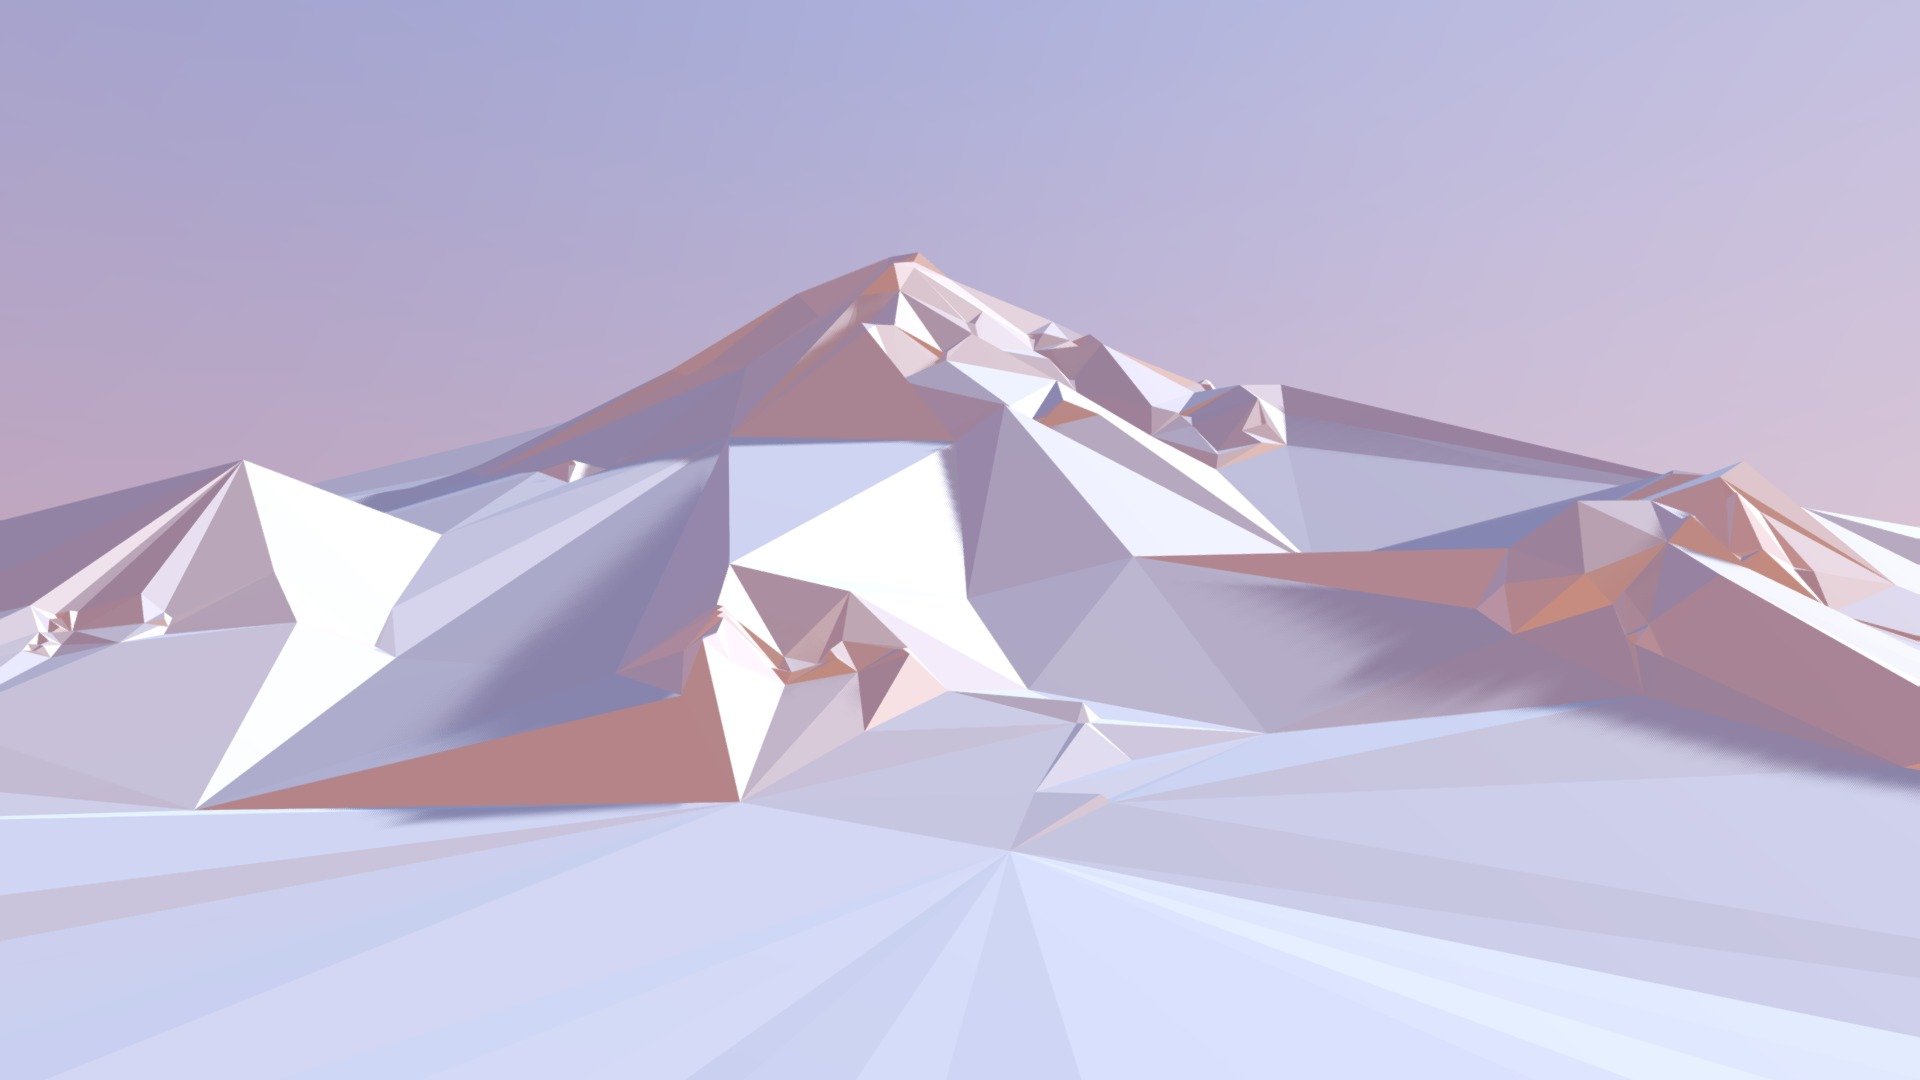 MOUNTAINS LOWPOLY_NO 4

You can customize the layout, materials and lighting to render images to use as posters, banner, billboard, media, template graphic, graphic design, background....

INCLUDE FILE

File Formats: - 3D Max 2016 ( Setting Lighting &amp; Material) - FBX (Multi Format) - OBJ (Multi Format) - Cinema 4D ( Setting Lighting &amp; Material) Hope you like it!

Thank you! - MOUNTAINS LOWPOLY_NO 4 - Buy Royalty Free 3D model by DTA DESIGN STUDIO (@dtadesignstudio) 3d model